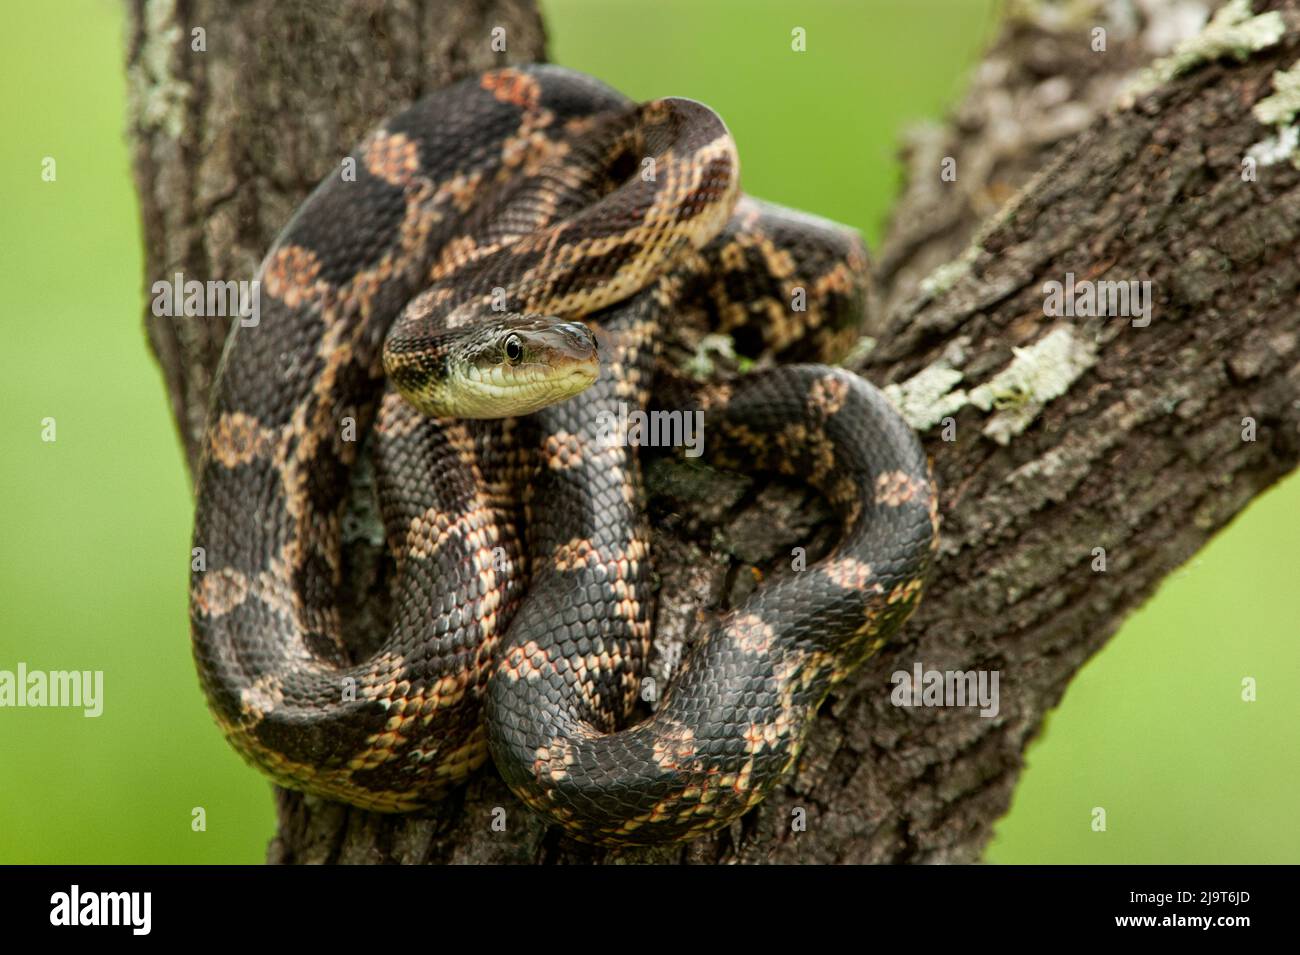 USA, Texas, Austin. Adult rat snake coiled in notch of tree. Stock Photo